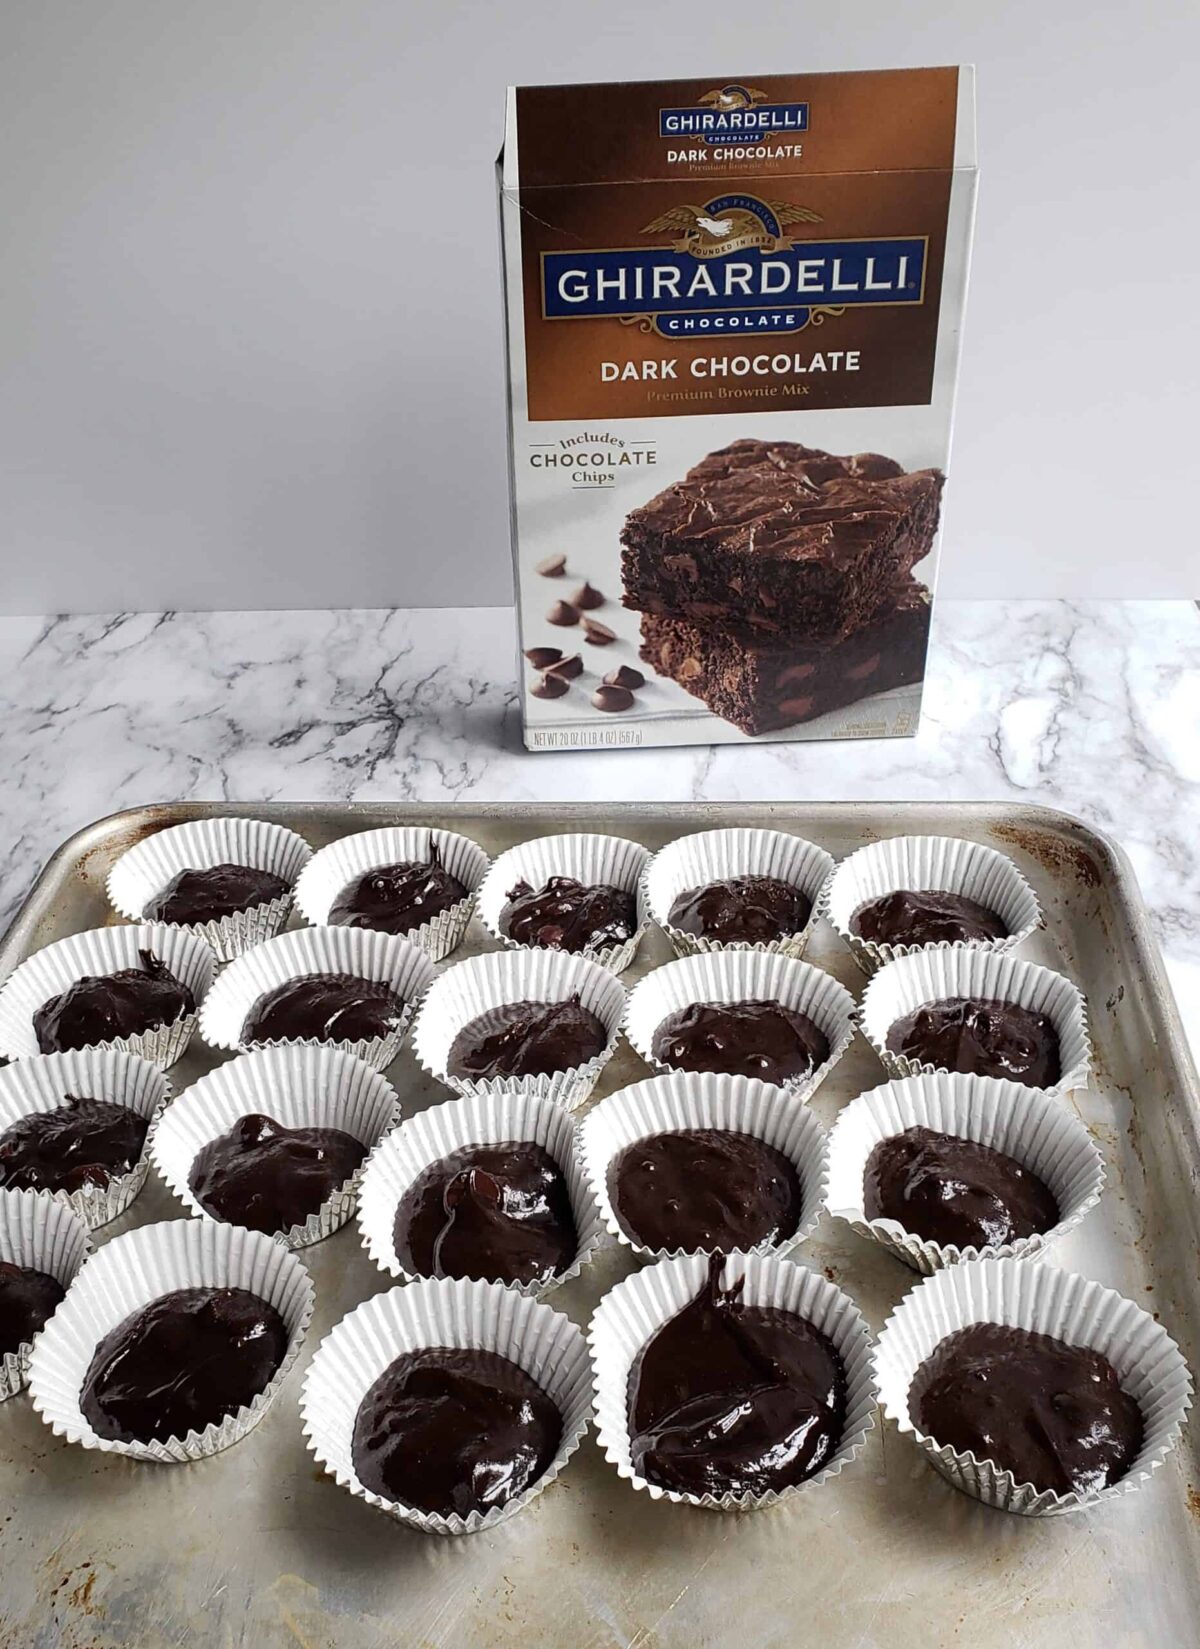 Ghiradelli brownie mix box and batter in mini muffin paper liners.